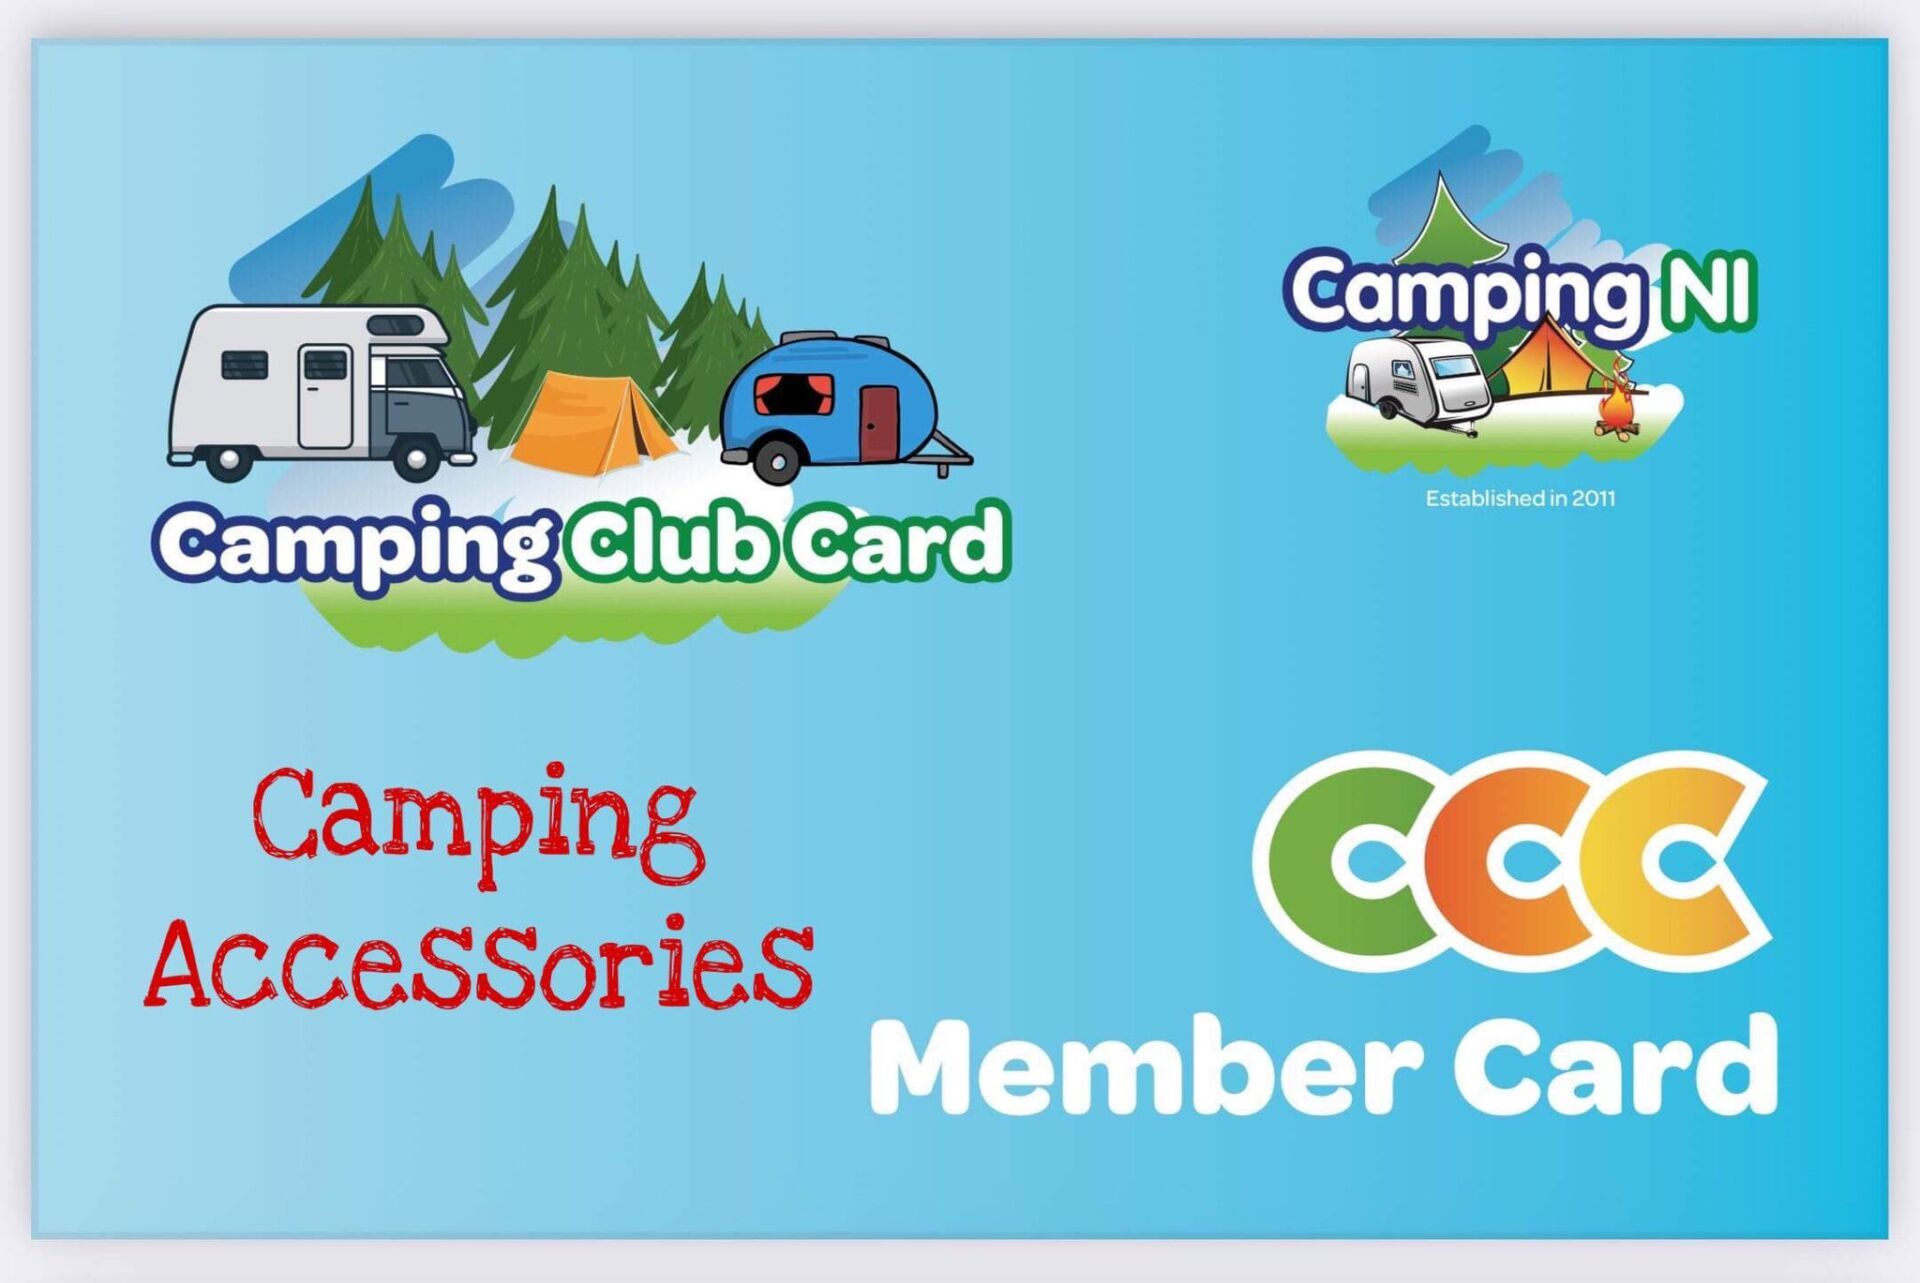 Club discounts on camping accessories CampingNI